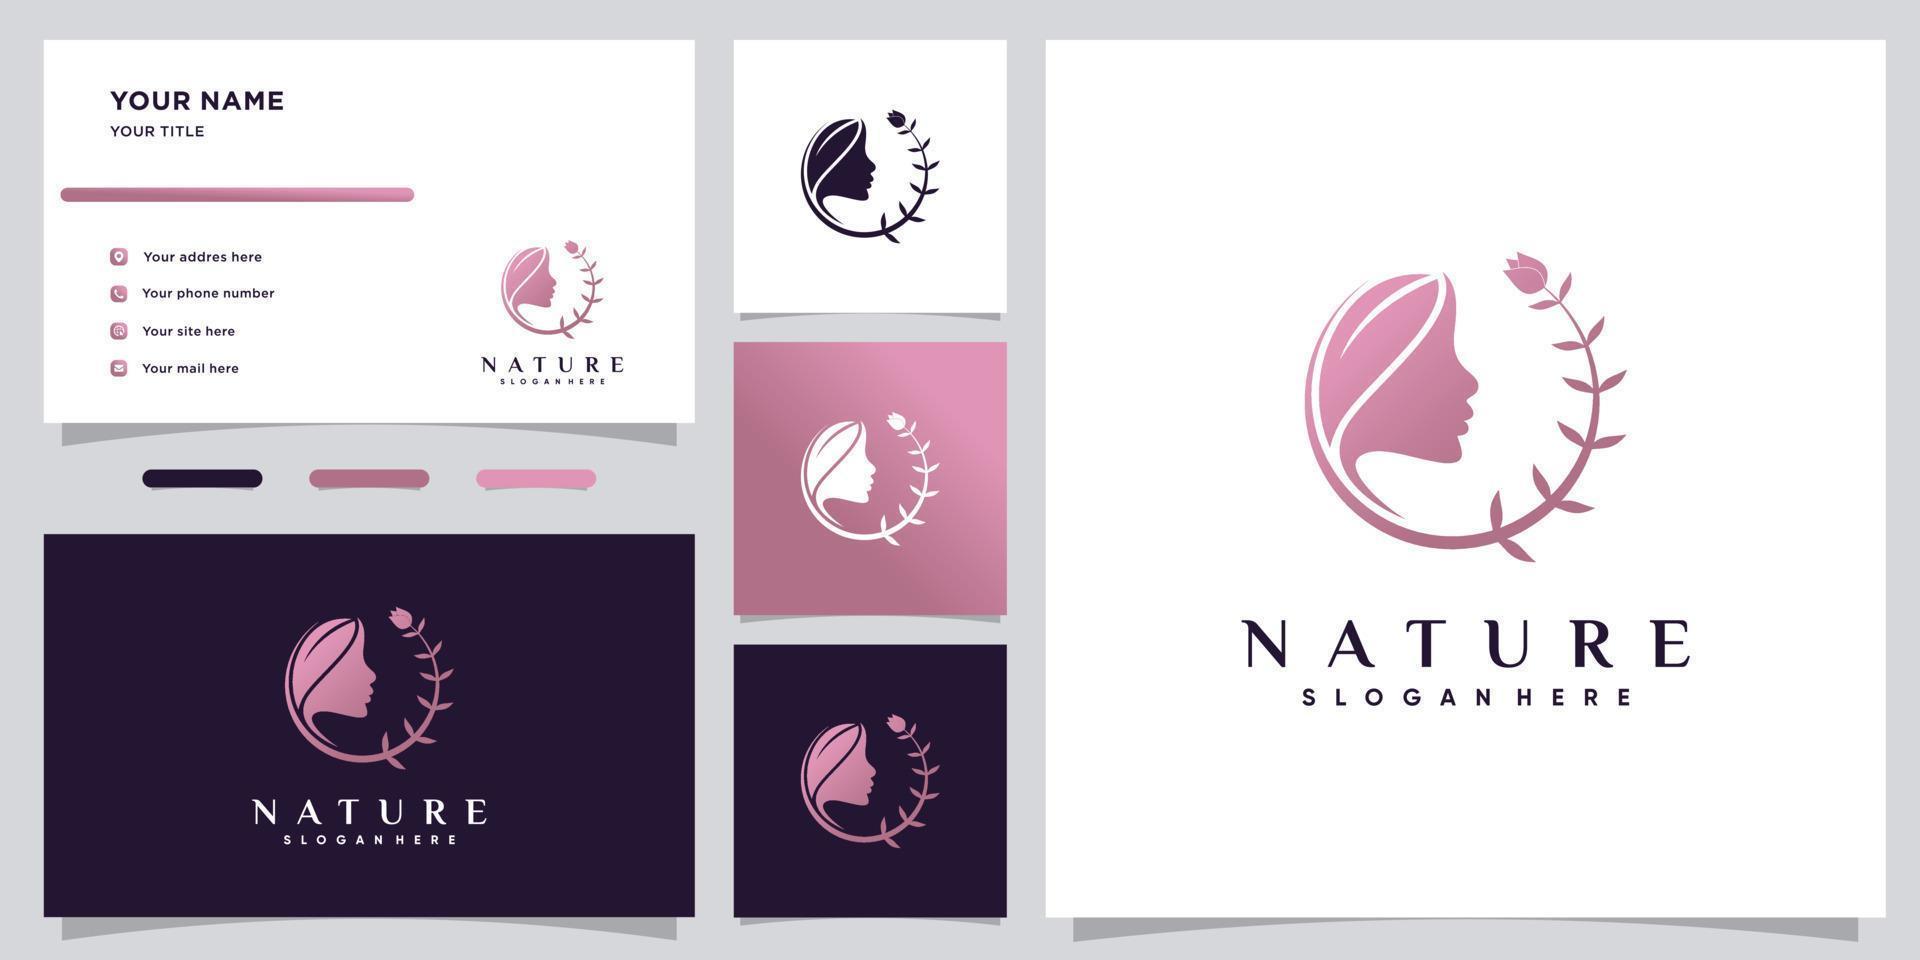 Natural beauty logo design with creative element and business card template Premium Vector